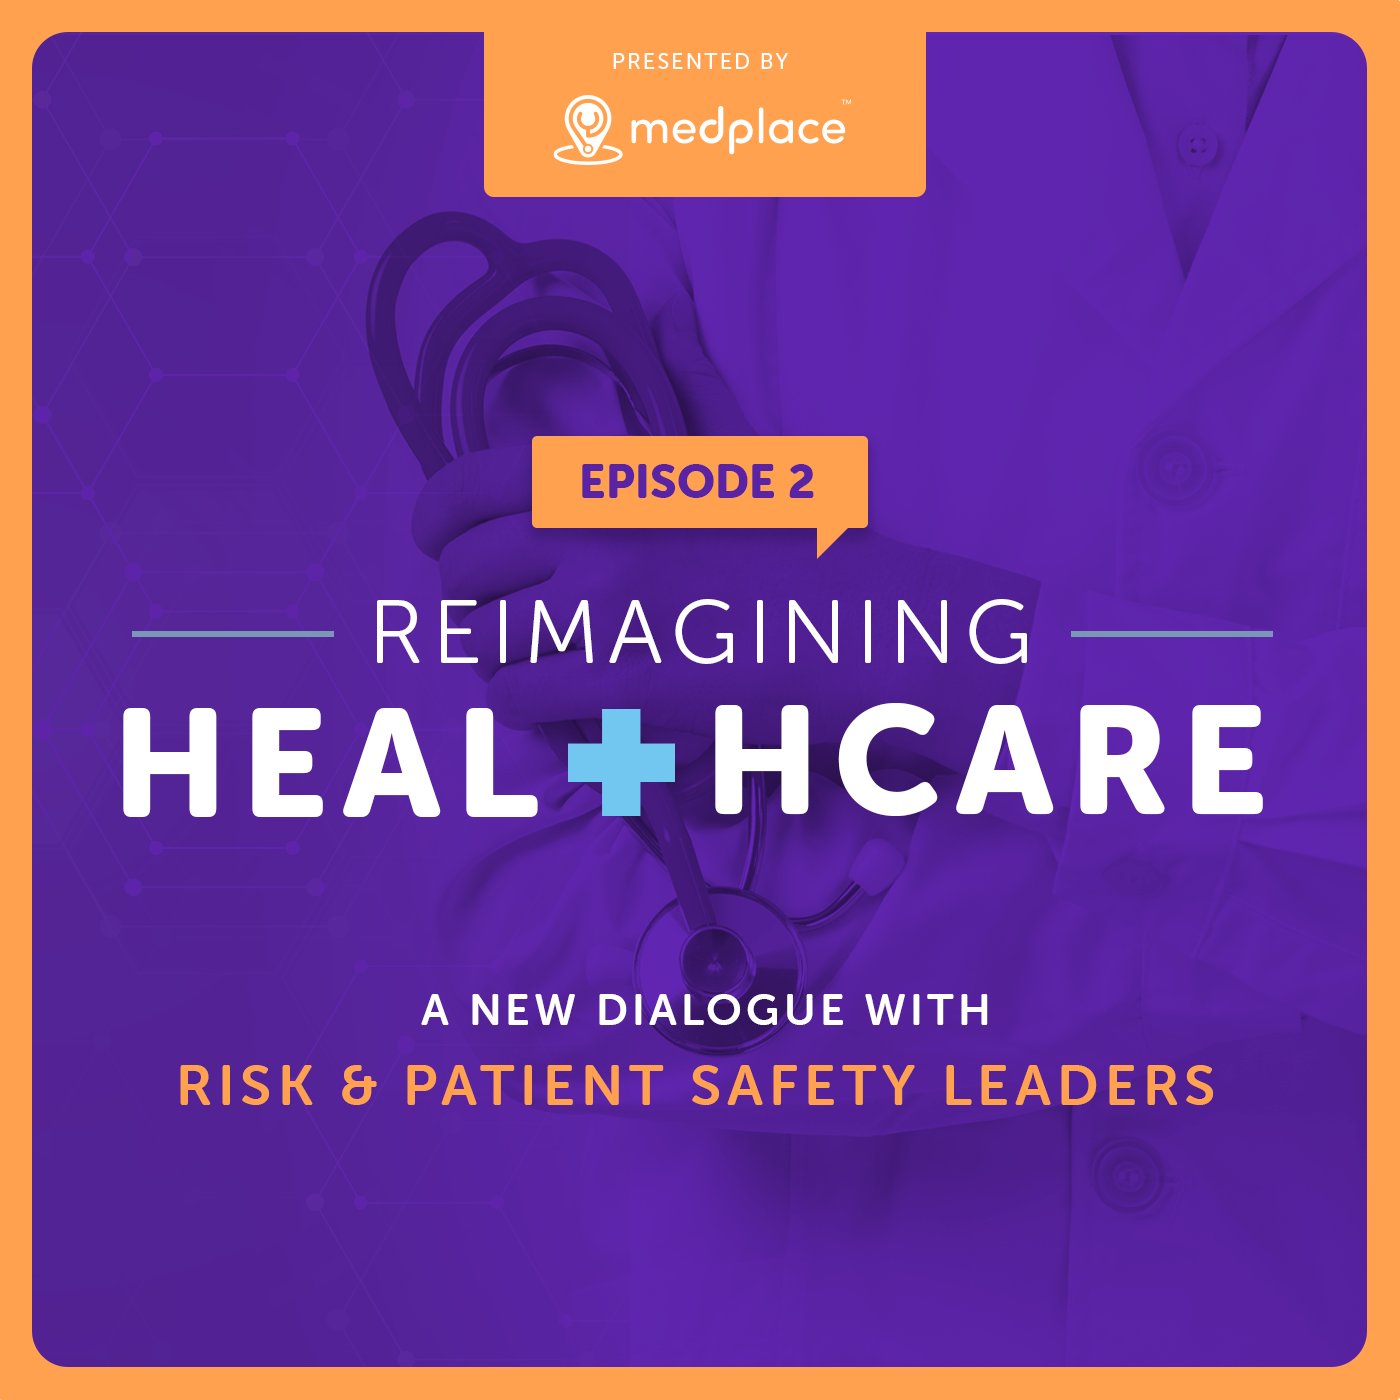 Episode 2 - Reimagining Healthcare - A New Dialogue with Risk and patient Safety Leaders